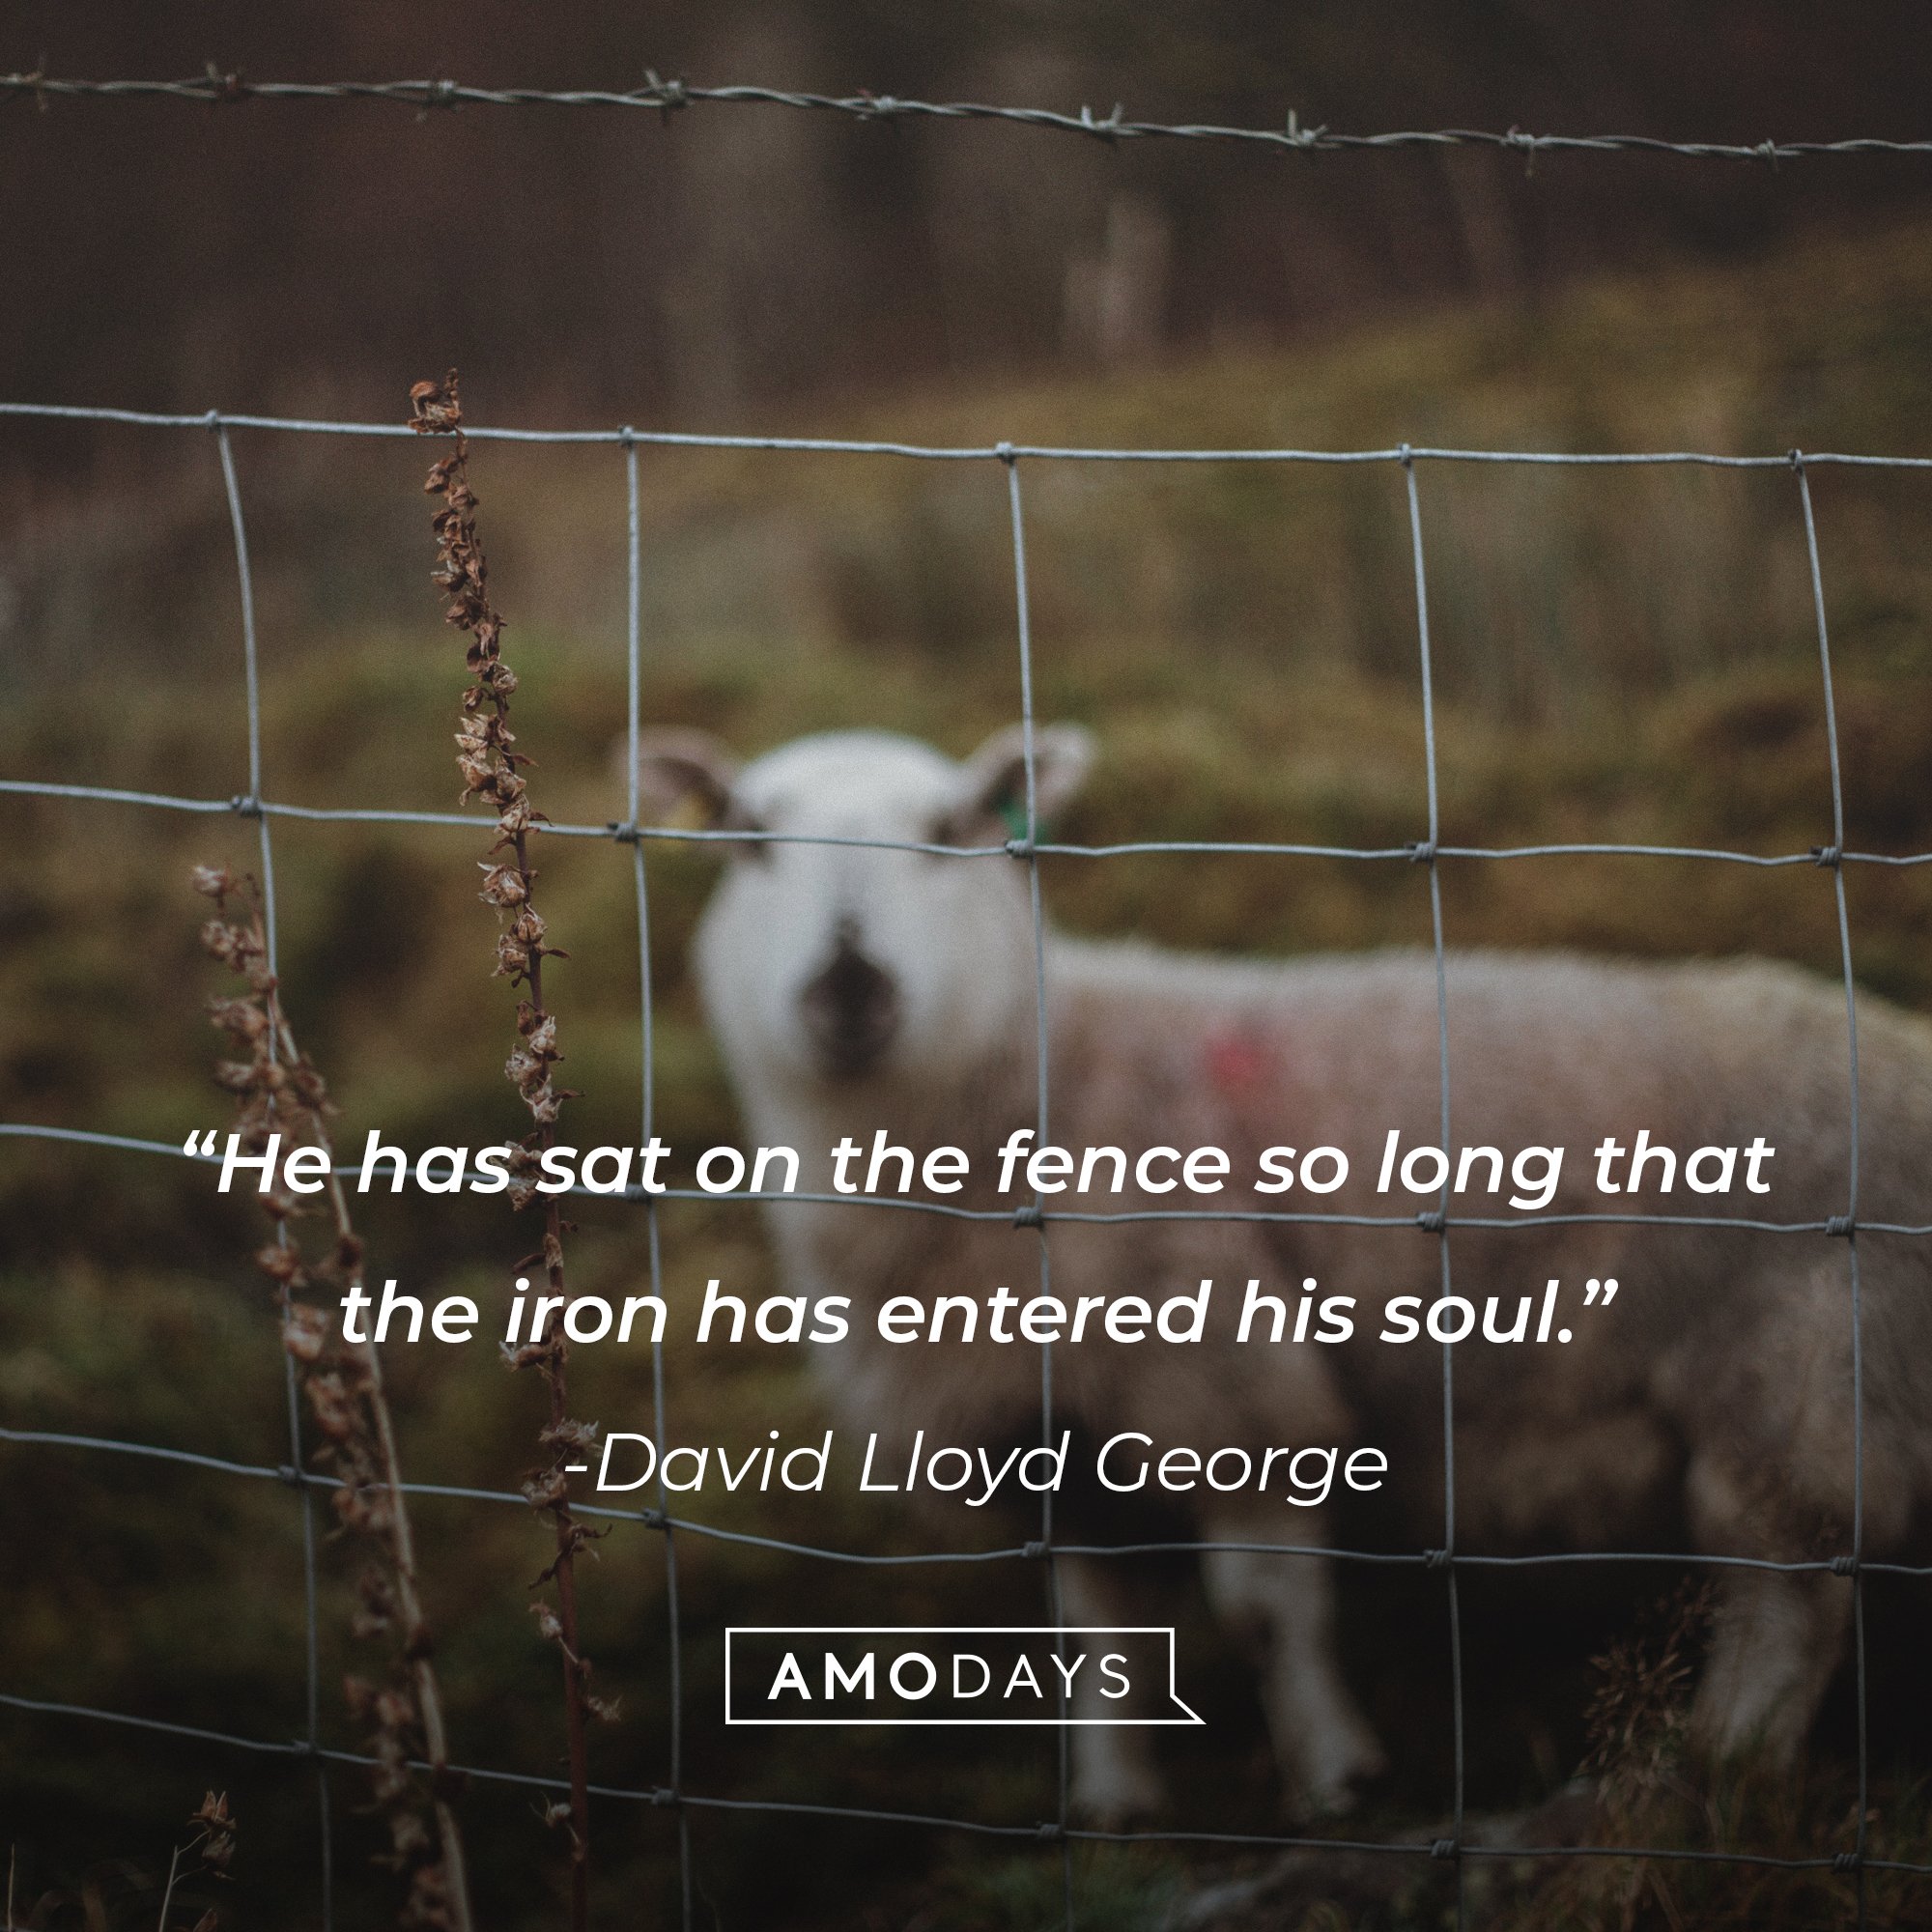 David Lloyd George's quote: “He has sat on the fence so long that the iron has entered his soul.” | Image: AmoDays